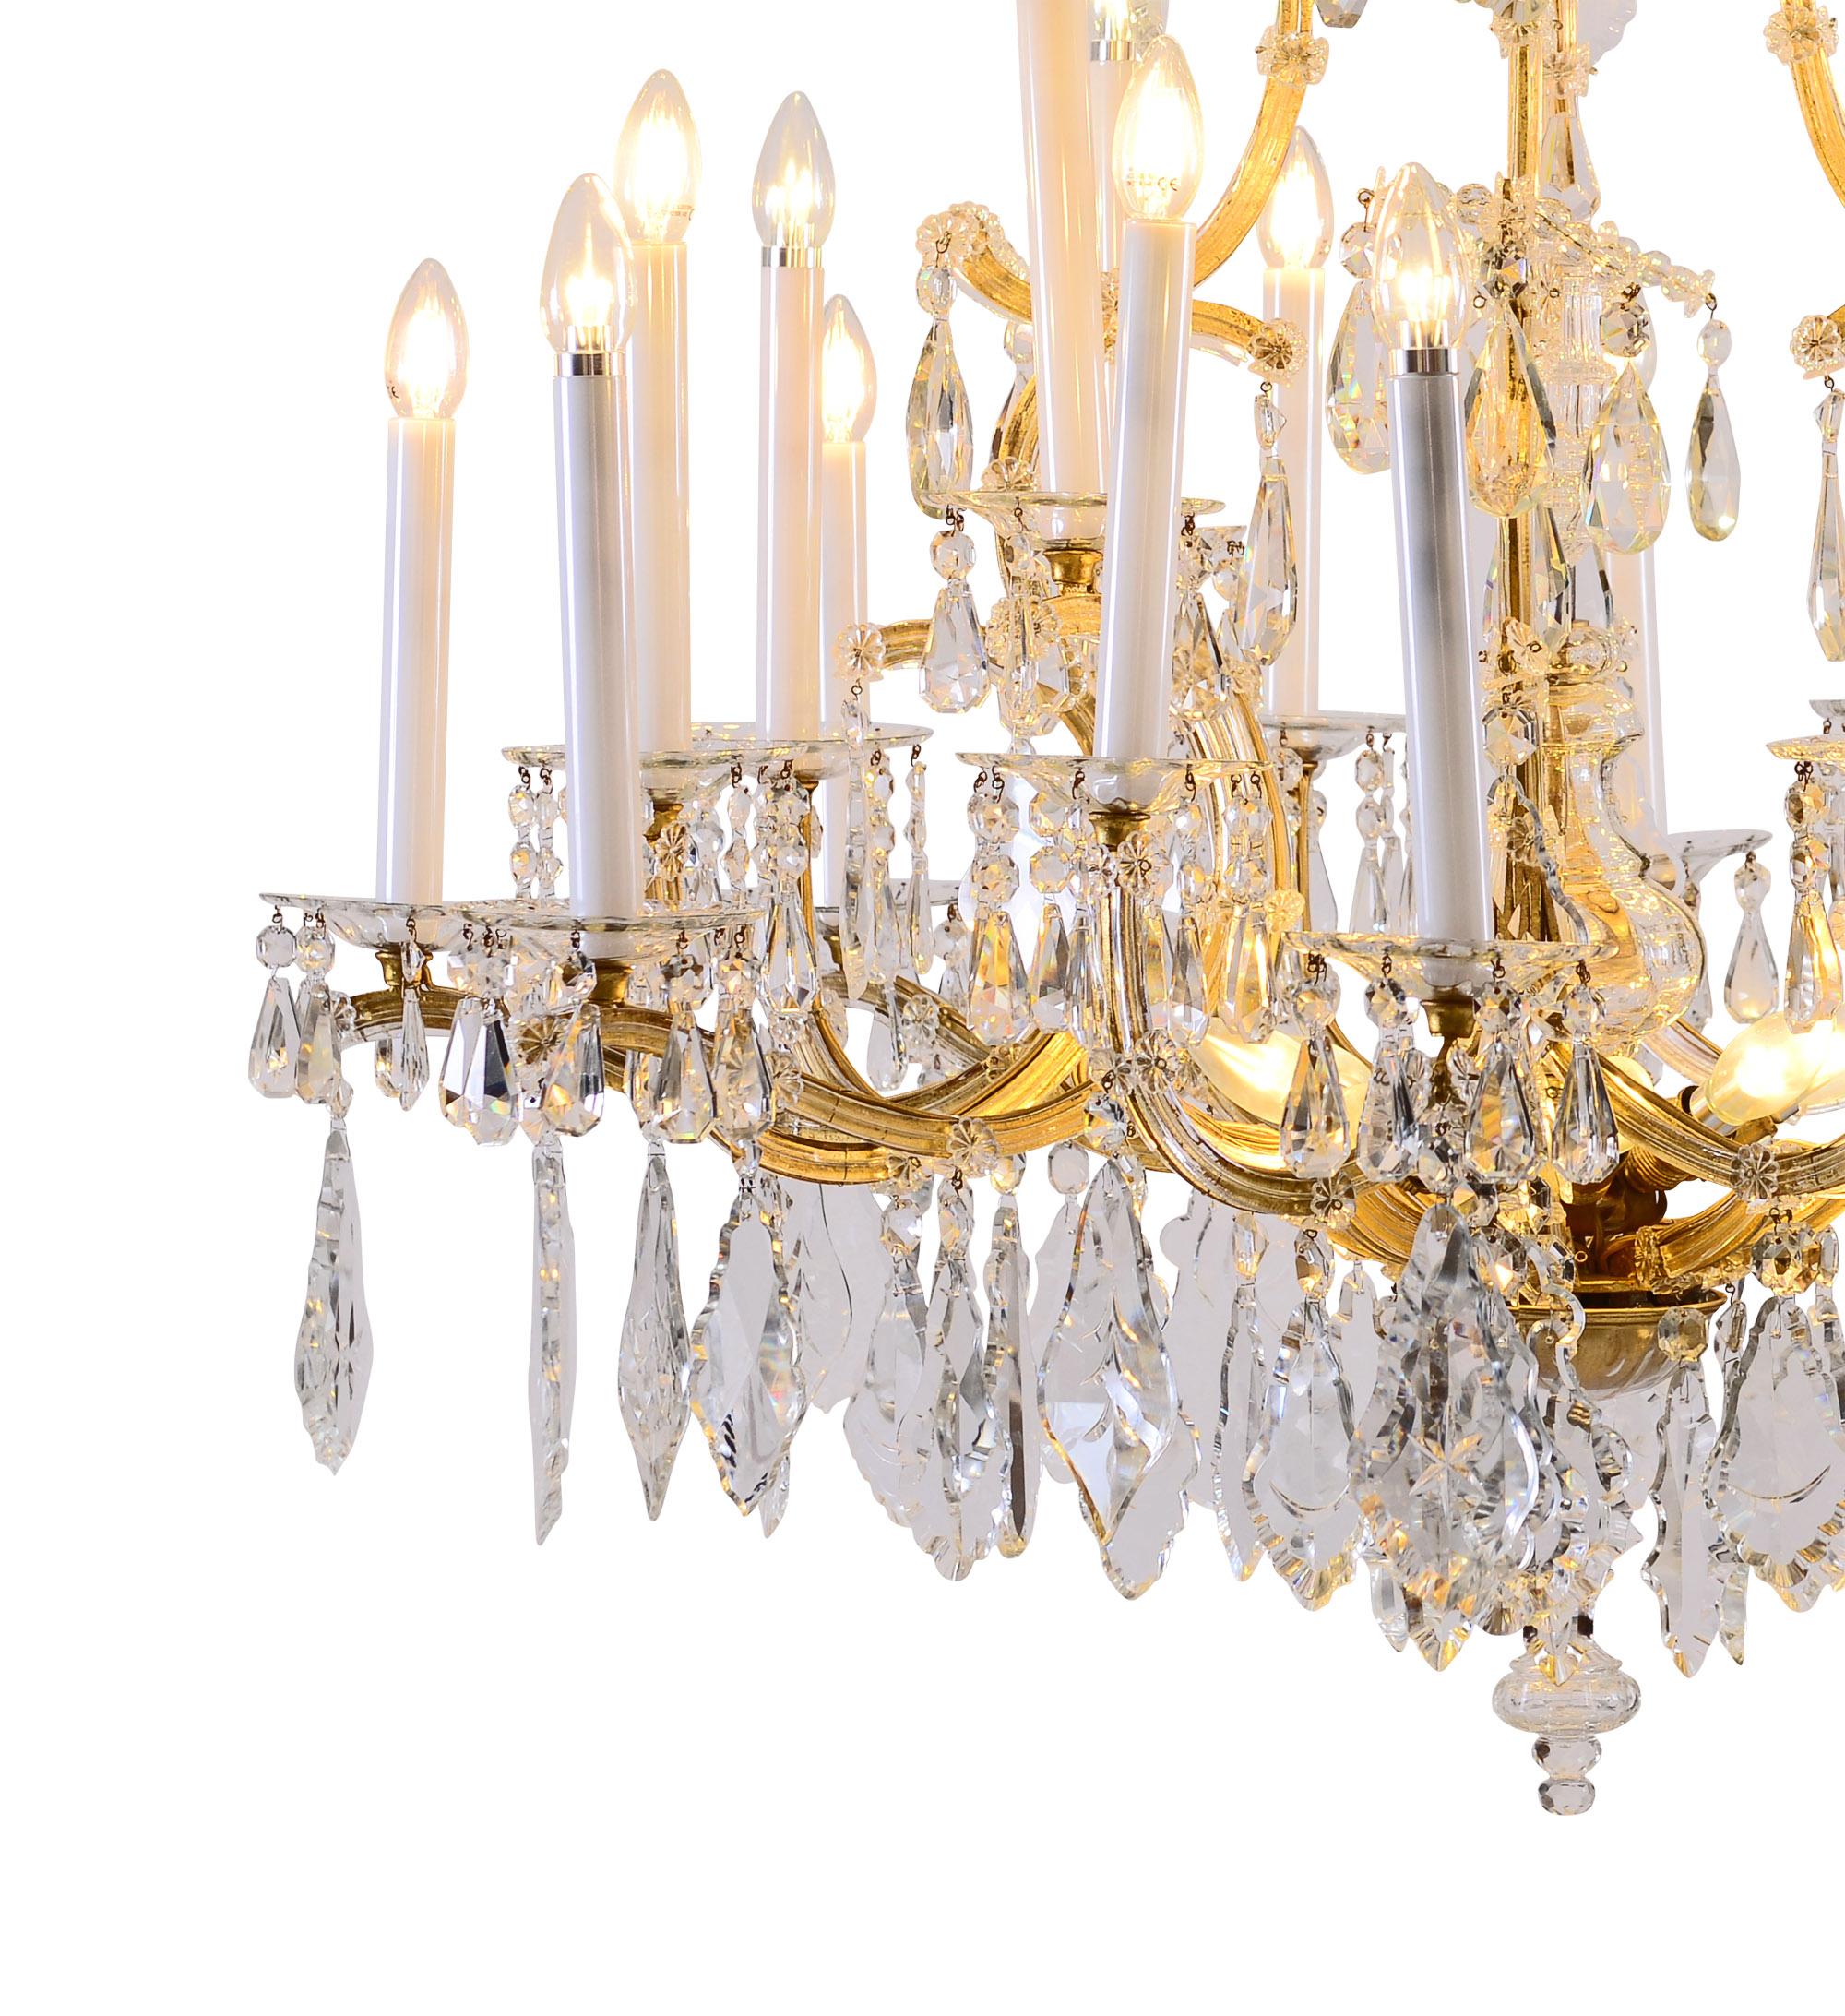 Baroque Original Lobmeyr Maria Theresien Crystal Chandelier, Richly Decorated 28 Lights For Sale